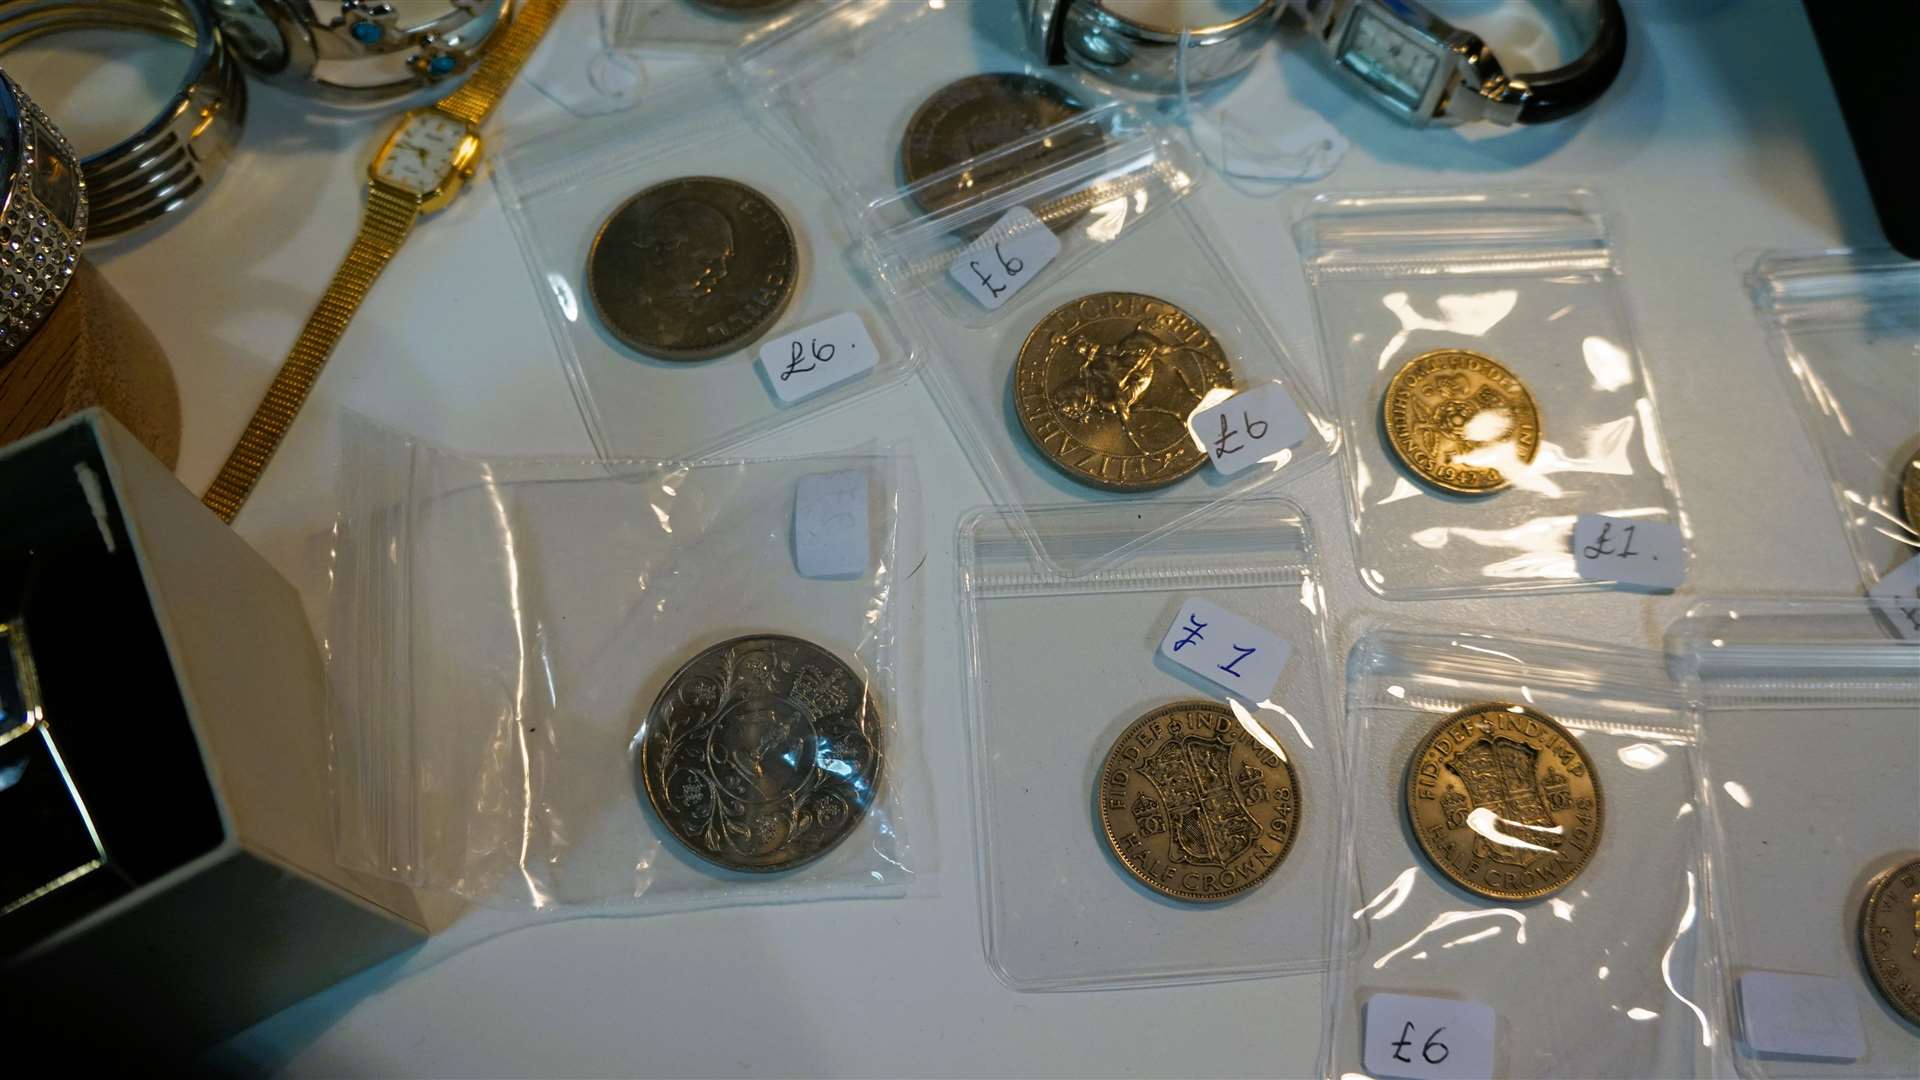 Some antique coins for sale at the shop. Picture: DGS